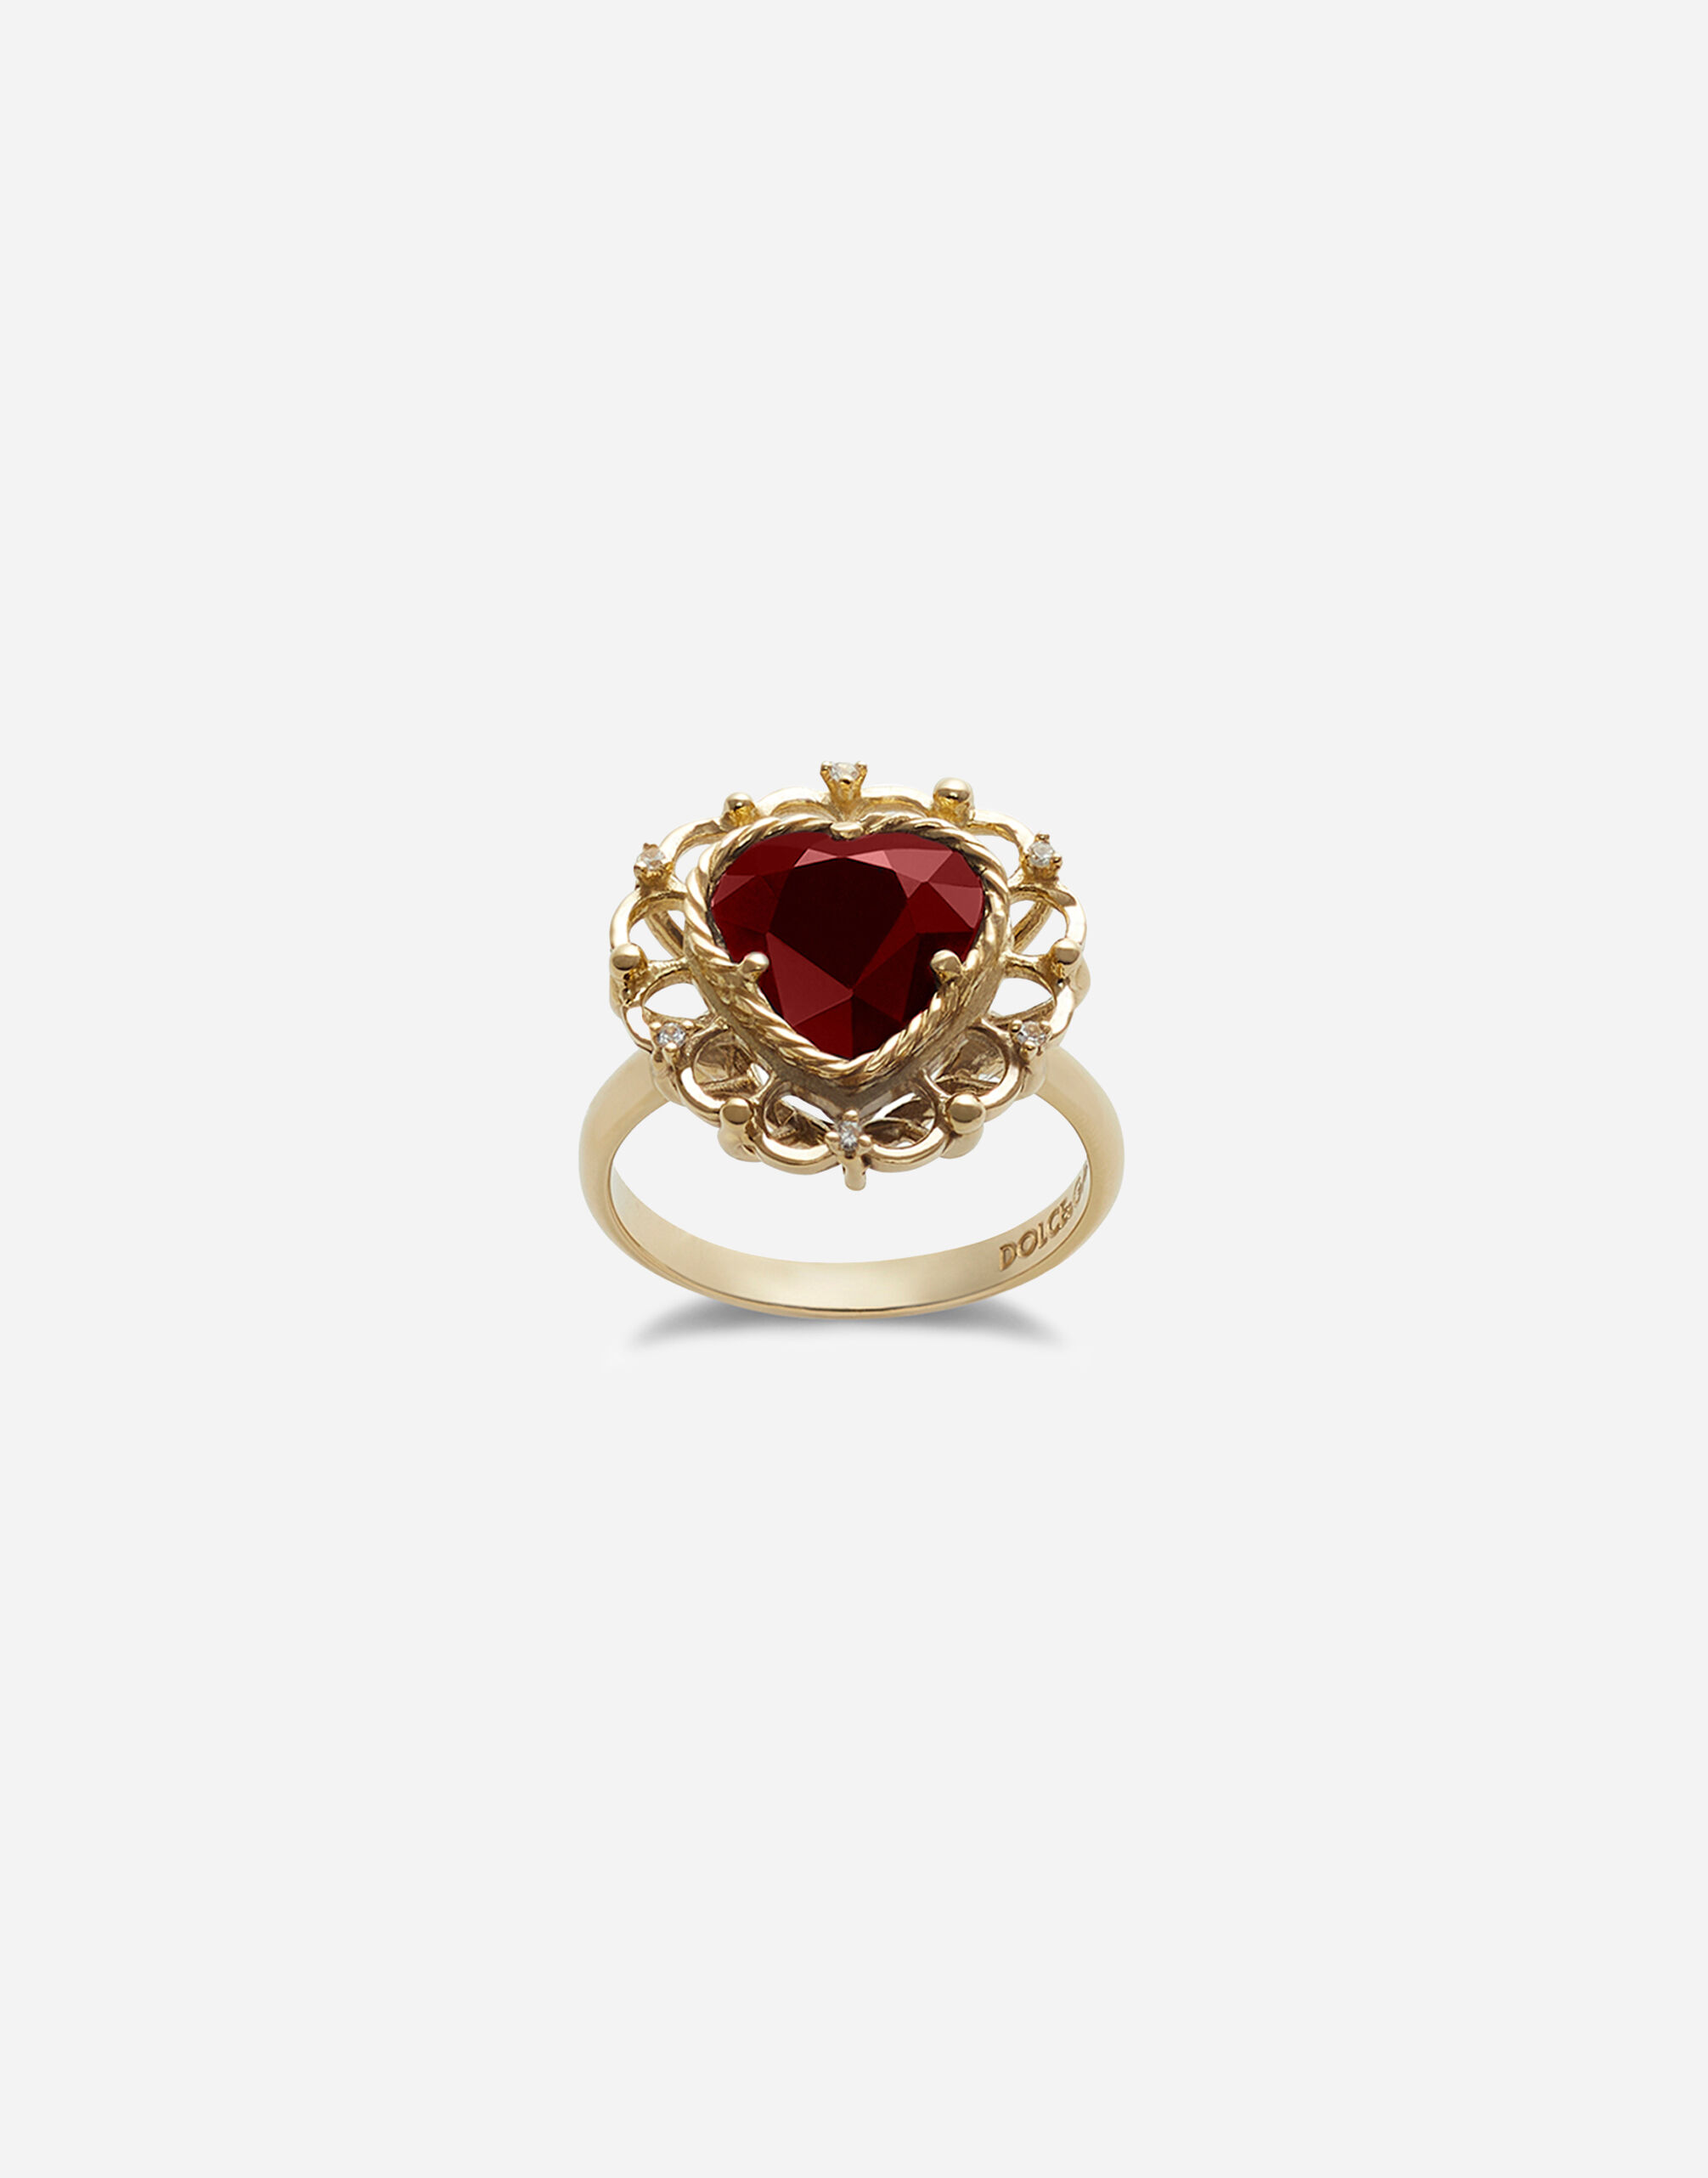 Dolce & Gabbana Heart ring in yellow gold 18Kt with a red rhodolite garnet. Yellow Gold WALD1GWDPEY